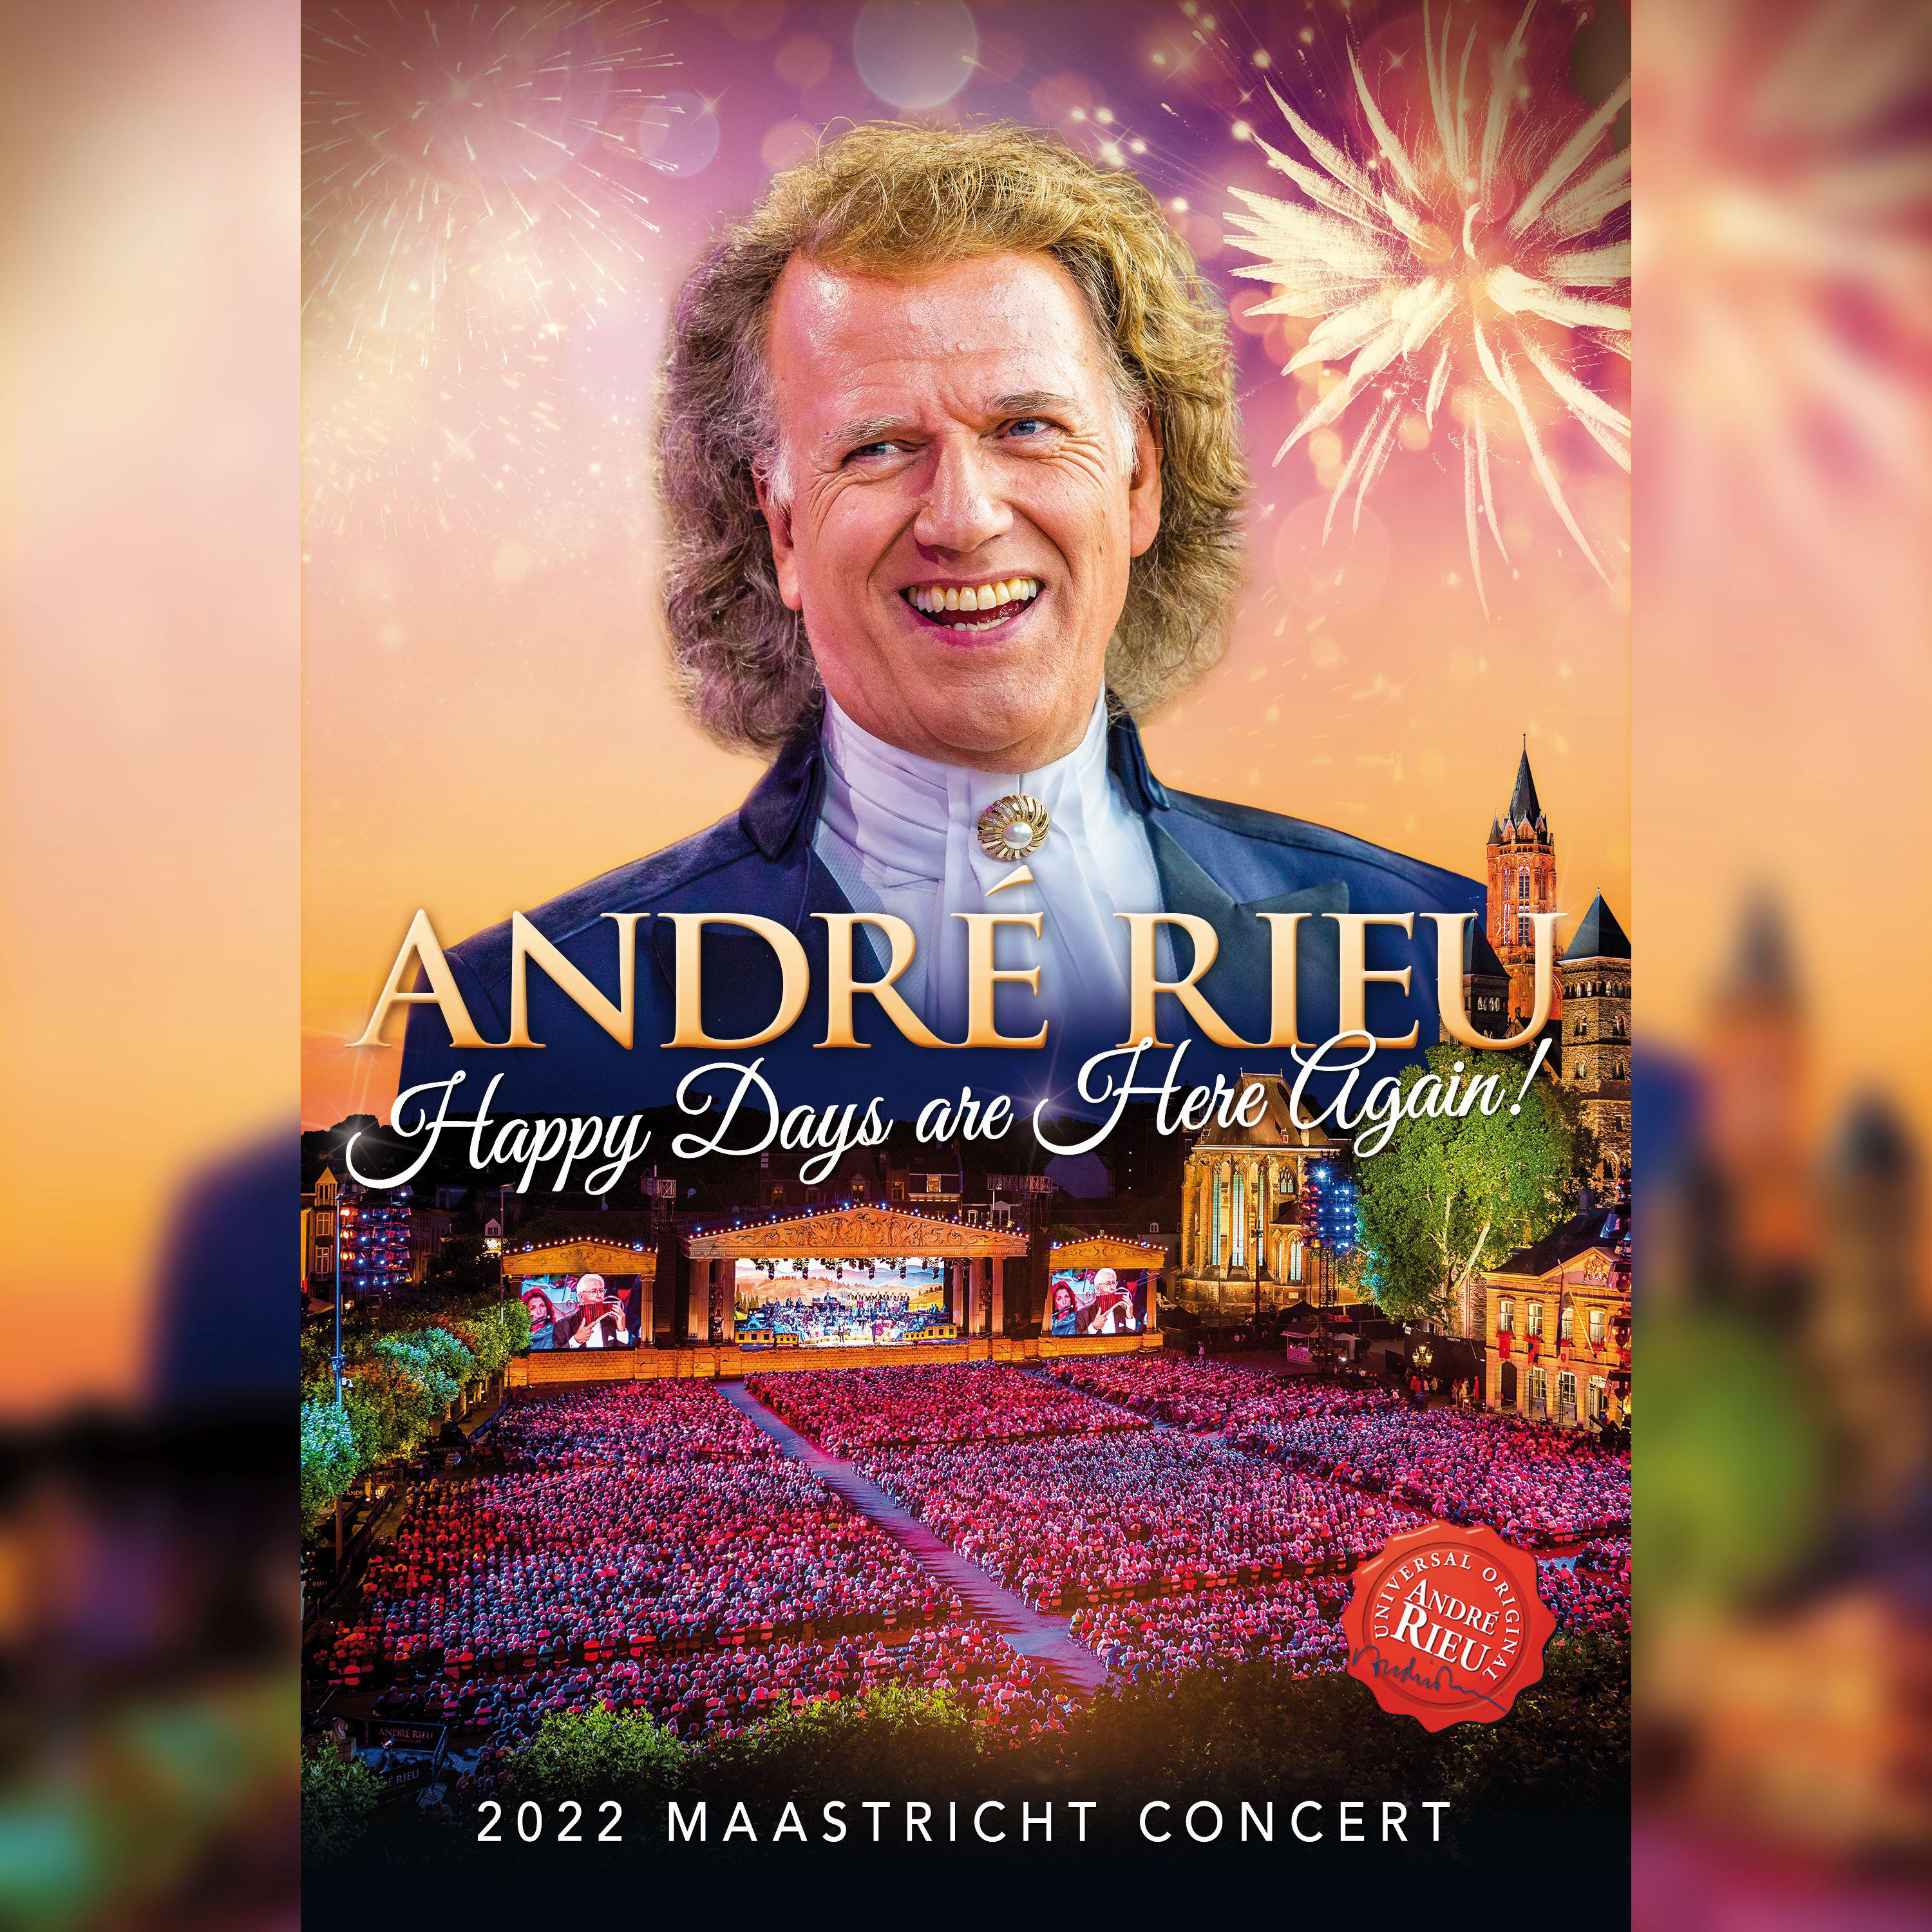 (DVD) Here Days Rieu - - Are Again Happy André